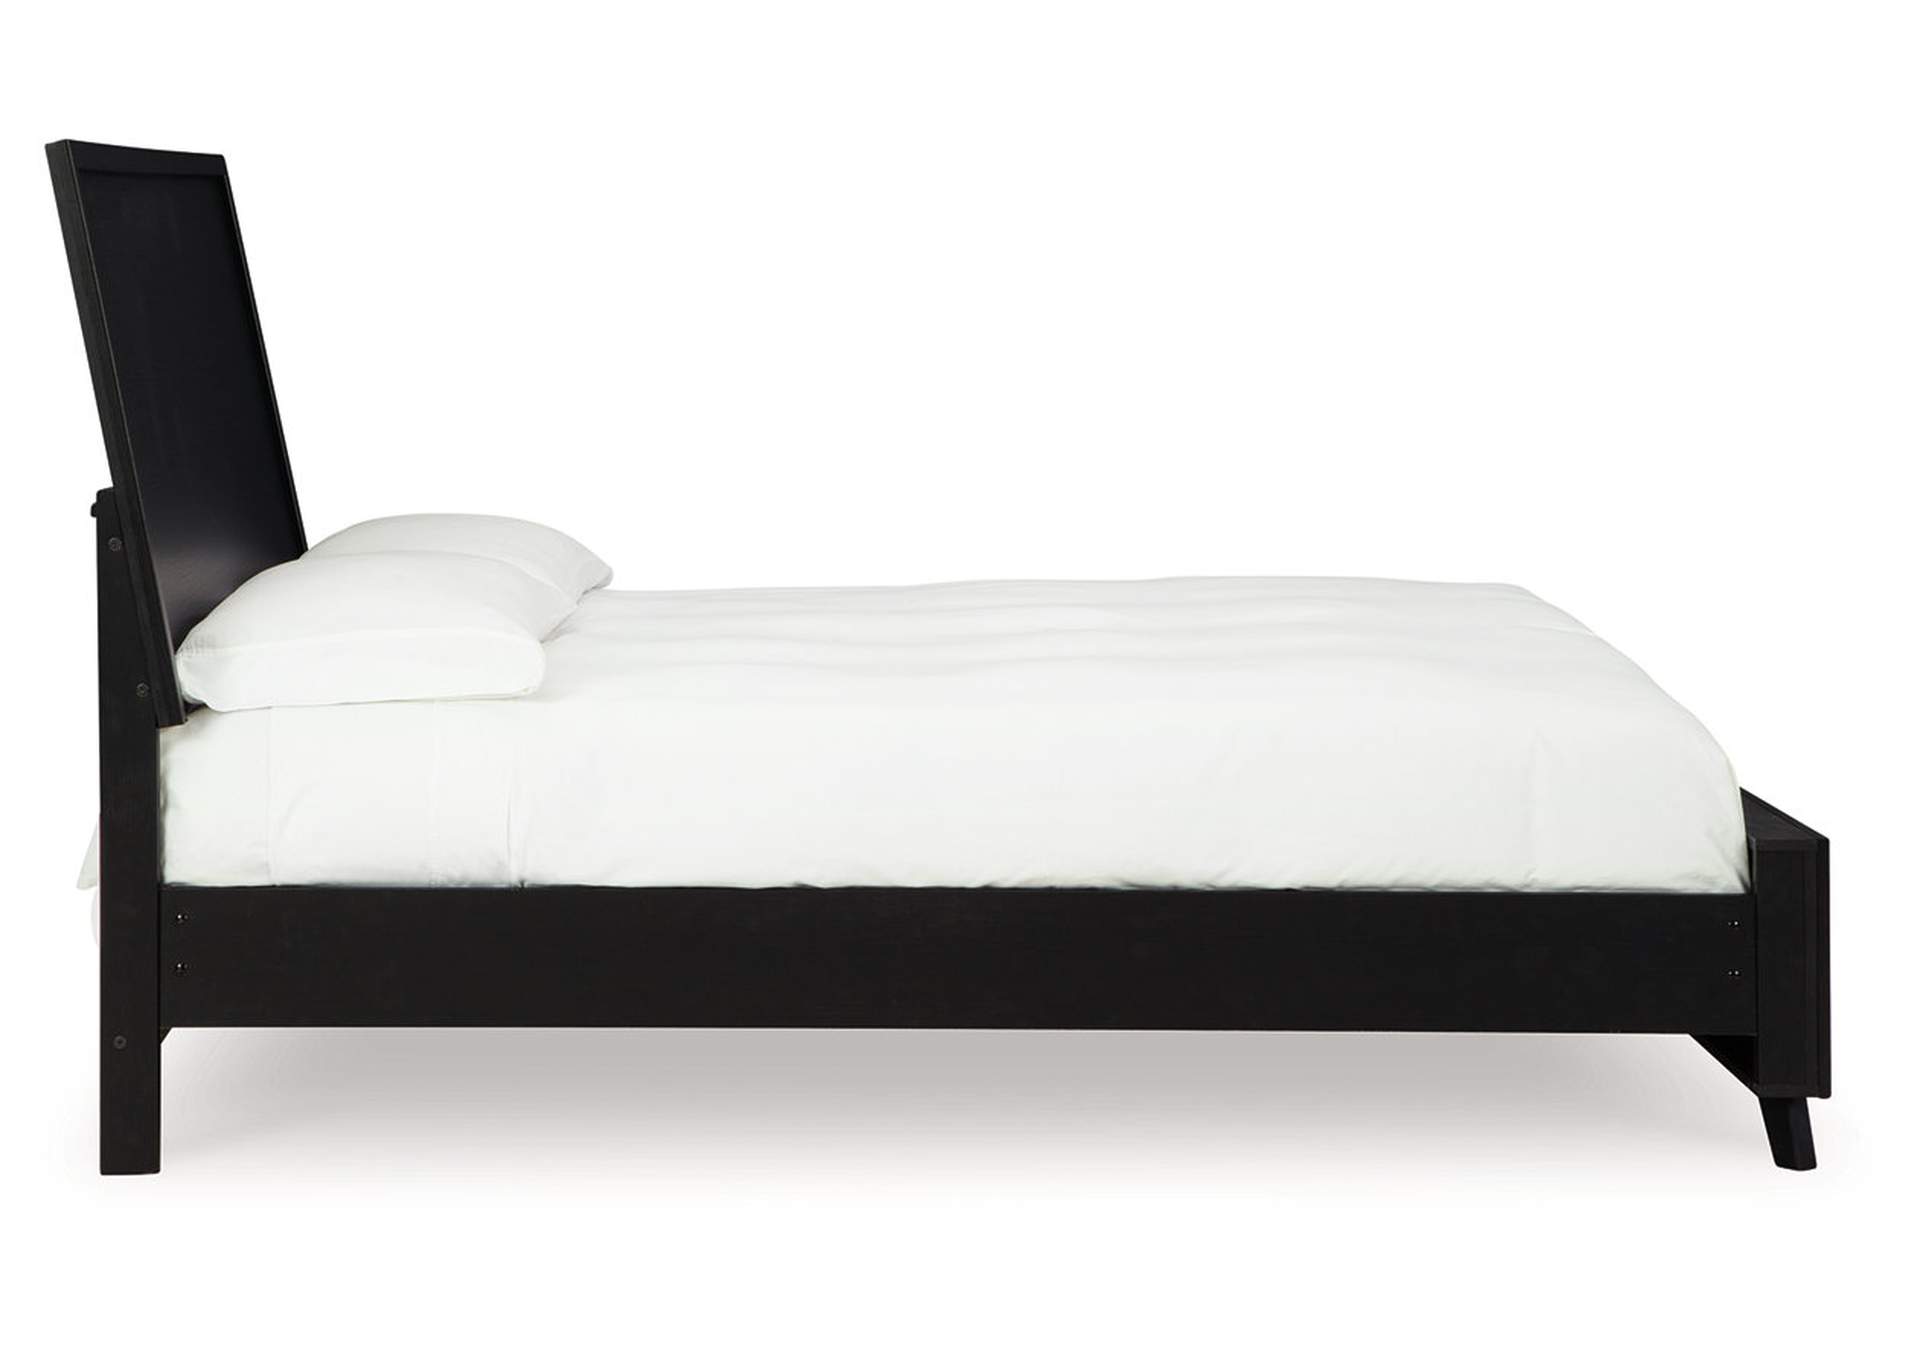 Danziar King Panel Bed,Signature Design By Ashley